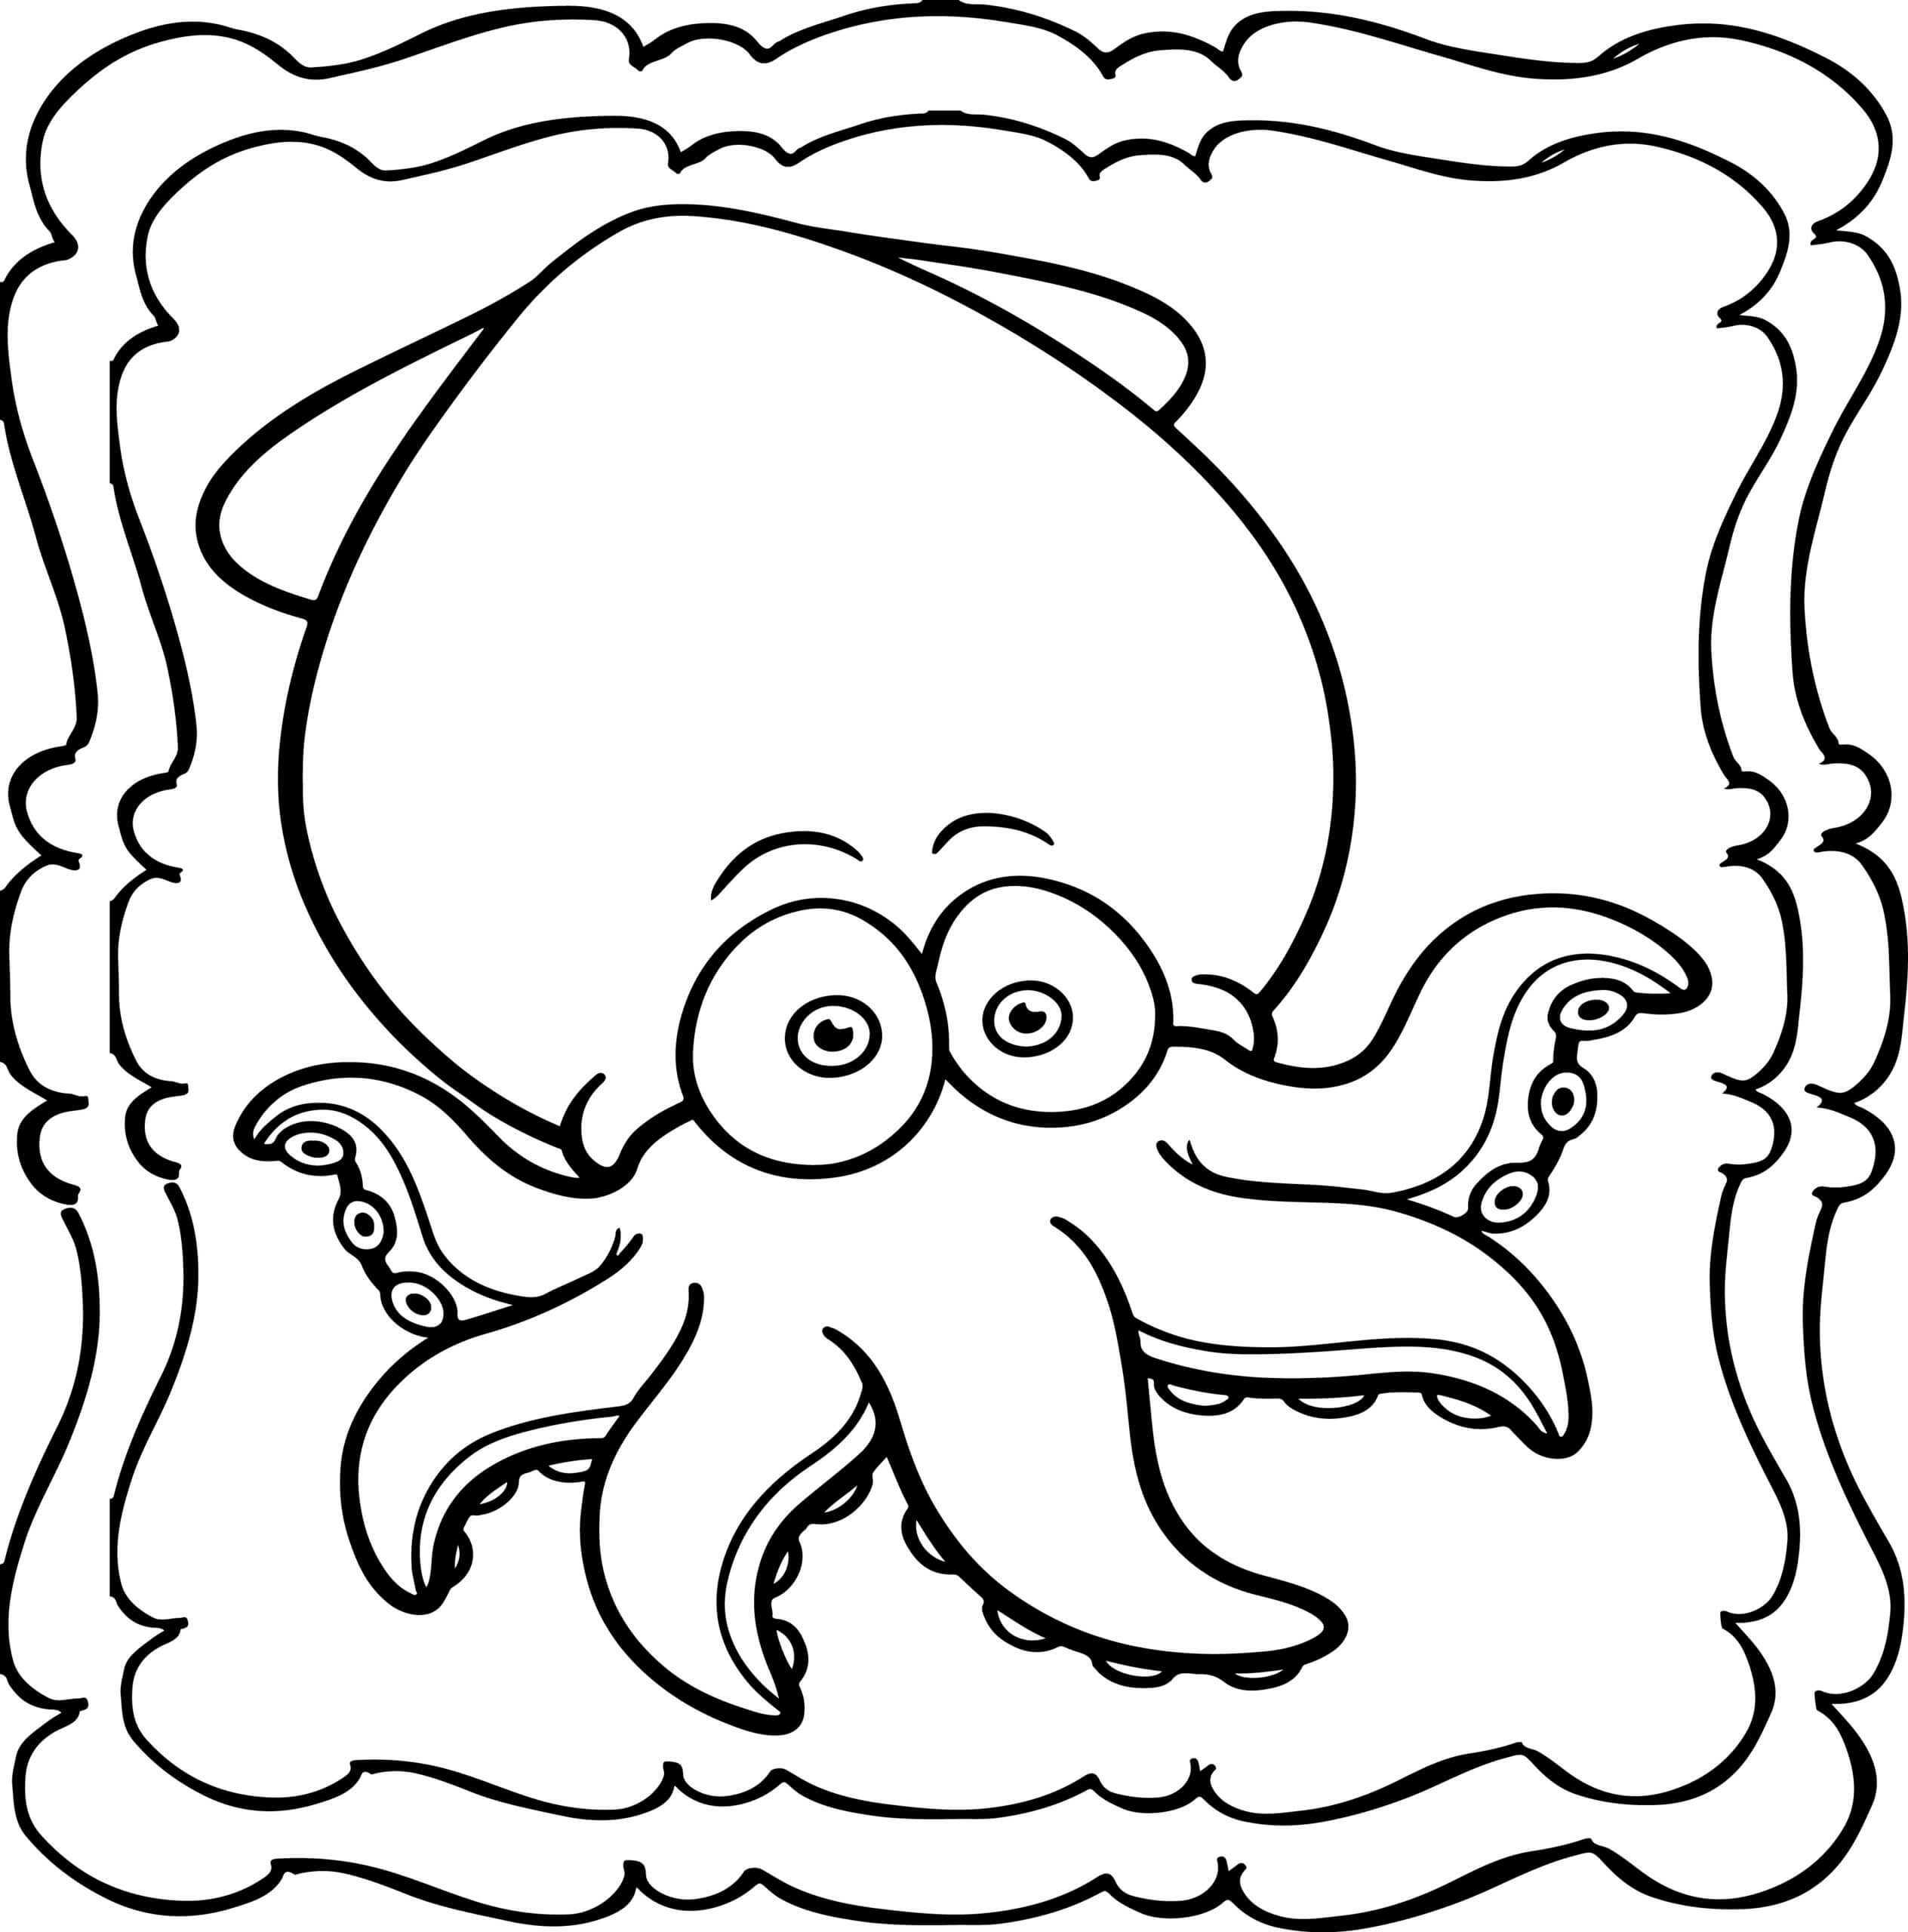 Funny Chibi Octopus coloring page - Download, Print or Color Online for ...